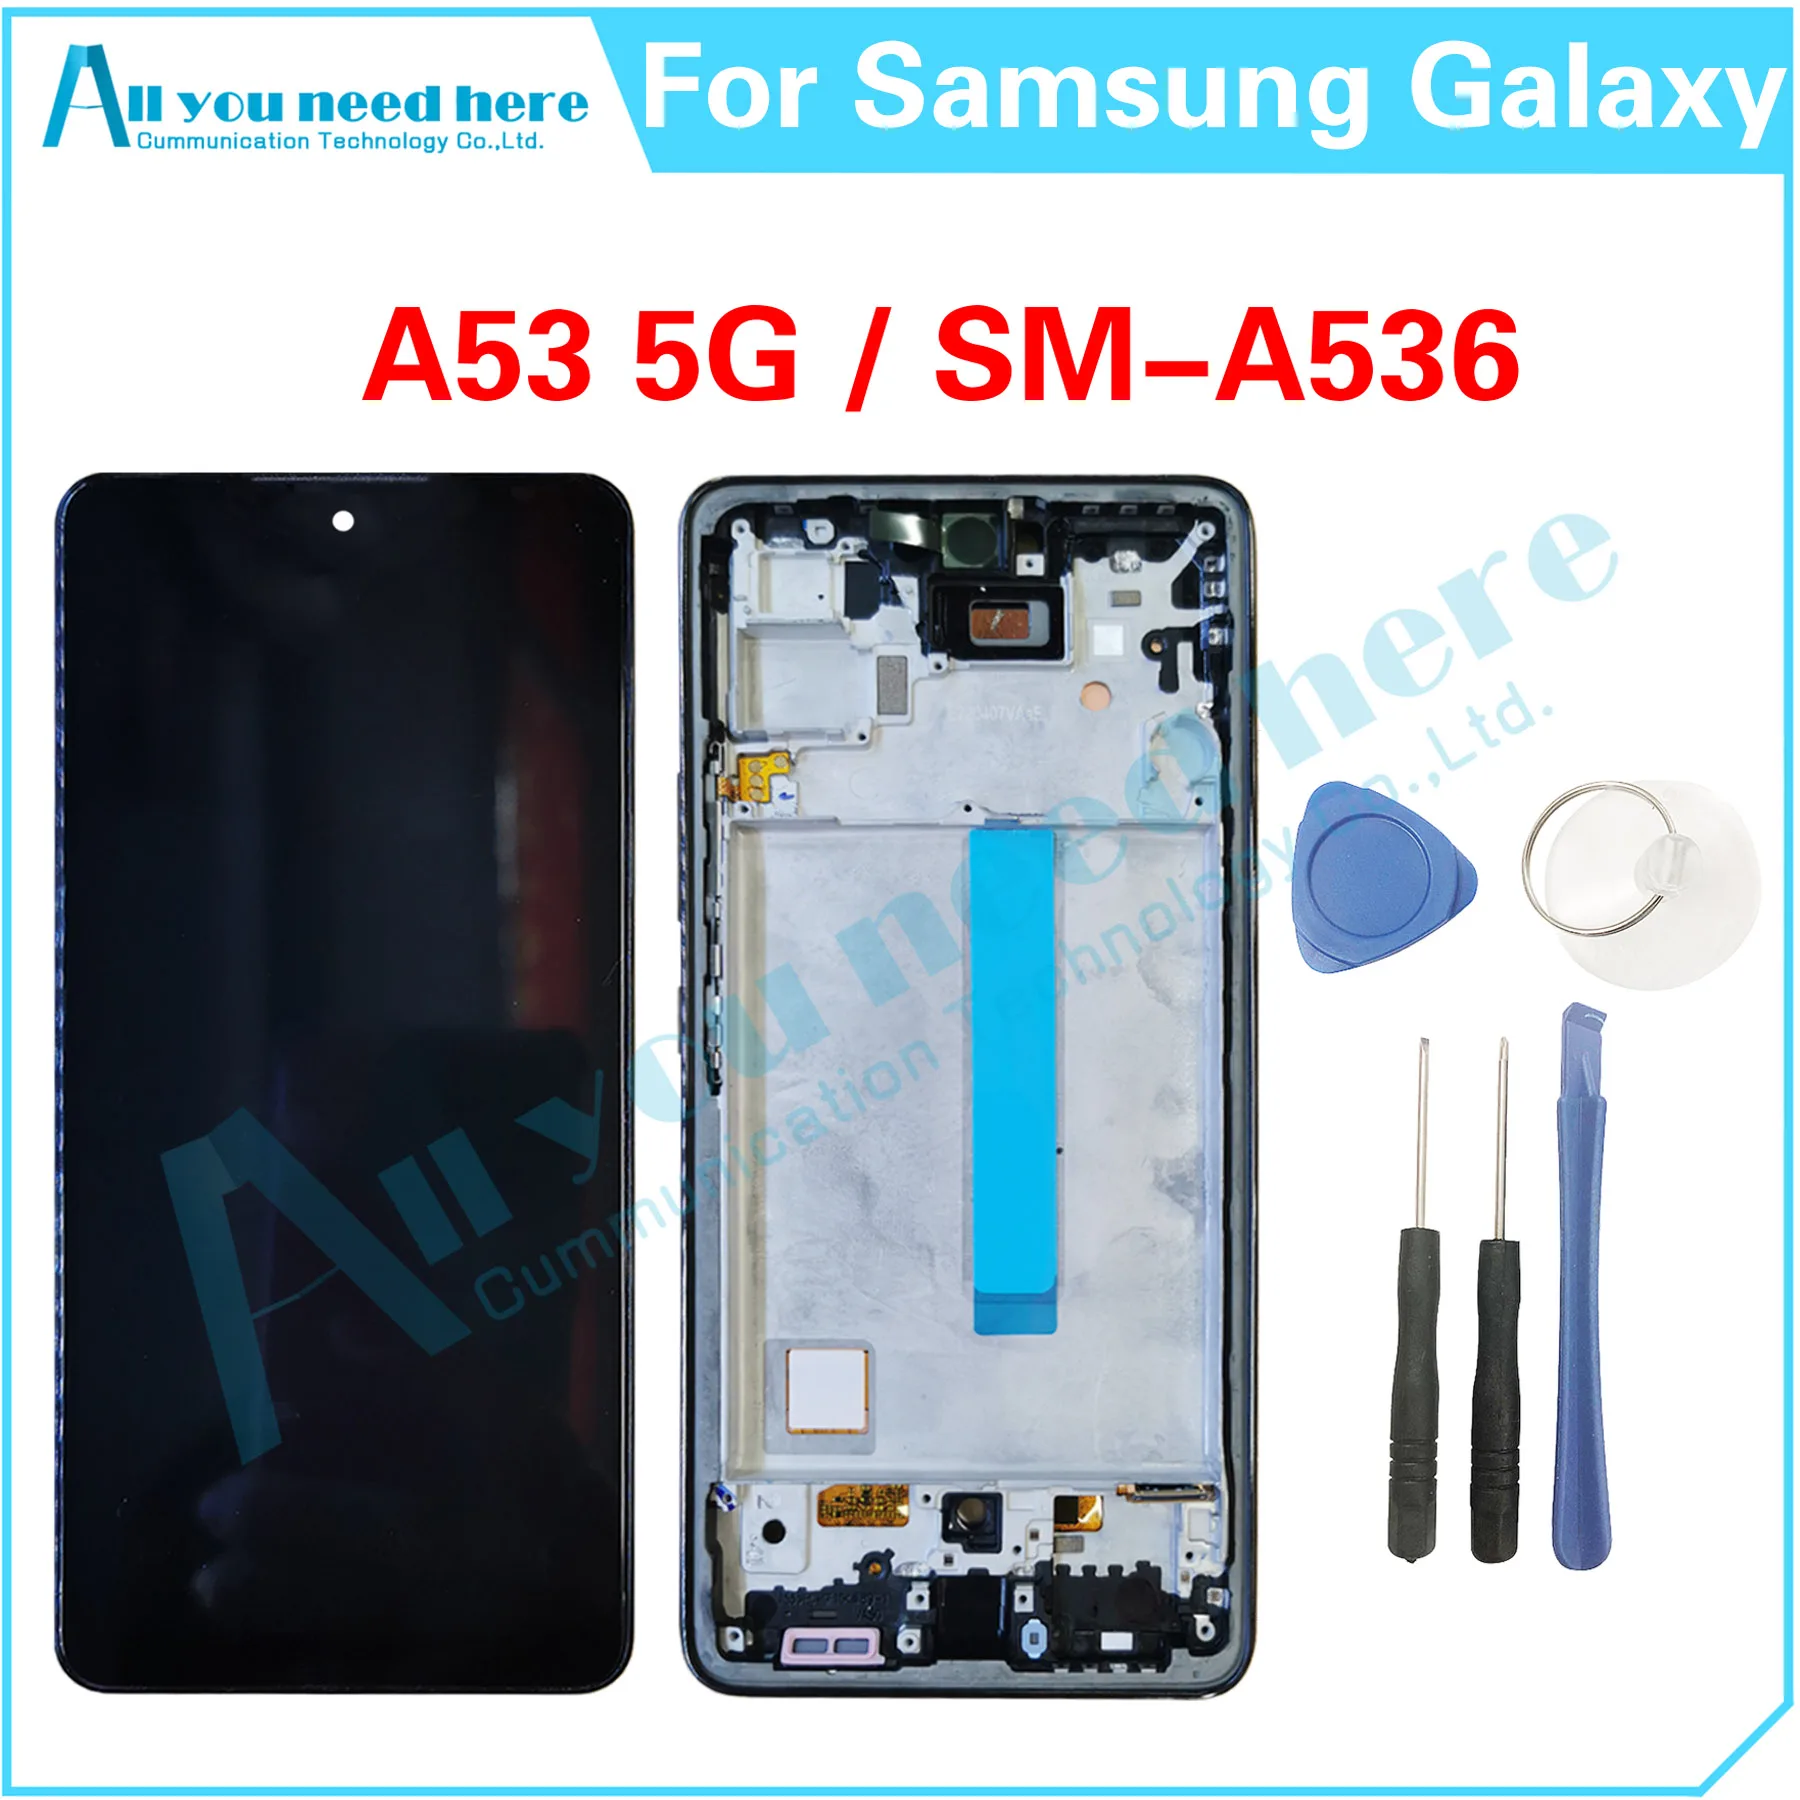 

100% Test For Samsung Galaxy A53 5G A536 A536B A536U A5360 A536E A536V A536W A536N LCD Display Touch Screen Digitizer Assembly